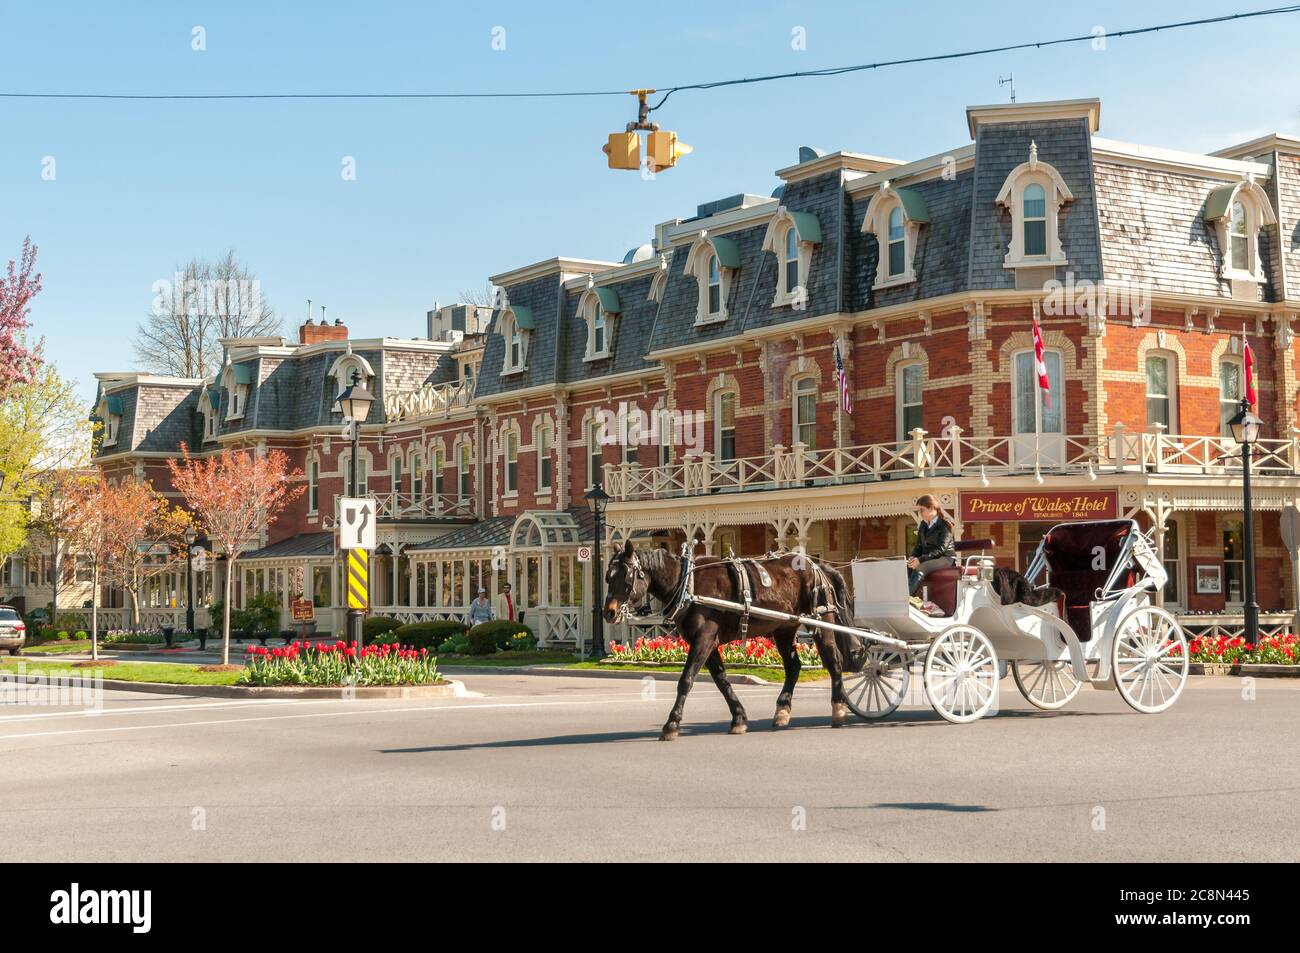 Niagara-on-the-Lake, Canada - April 25, 2012: View of the historic Prince of Wales Hotel in the center of Niagara-on-the-Lake, Canada Stock Photo